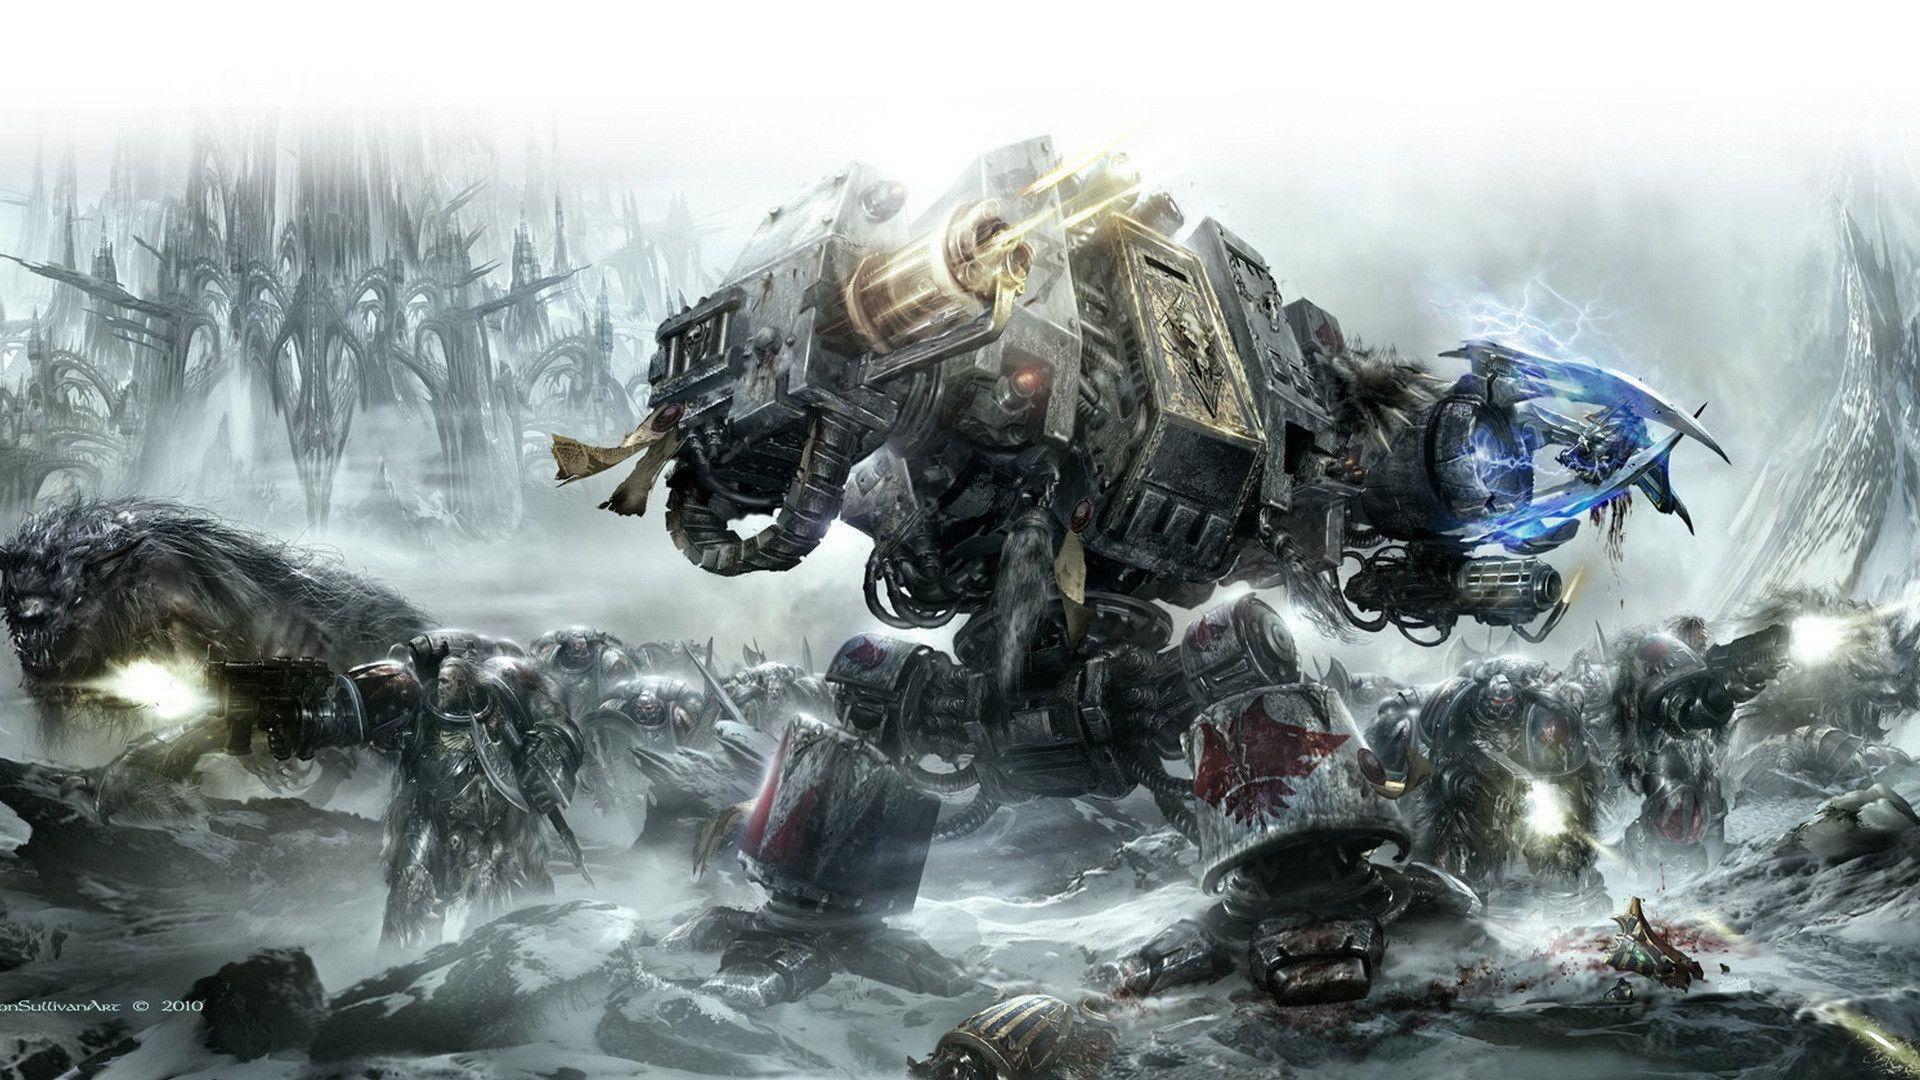 Wallpaper And Other Space Marine Related Art. Warhammer 000